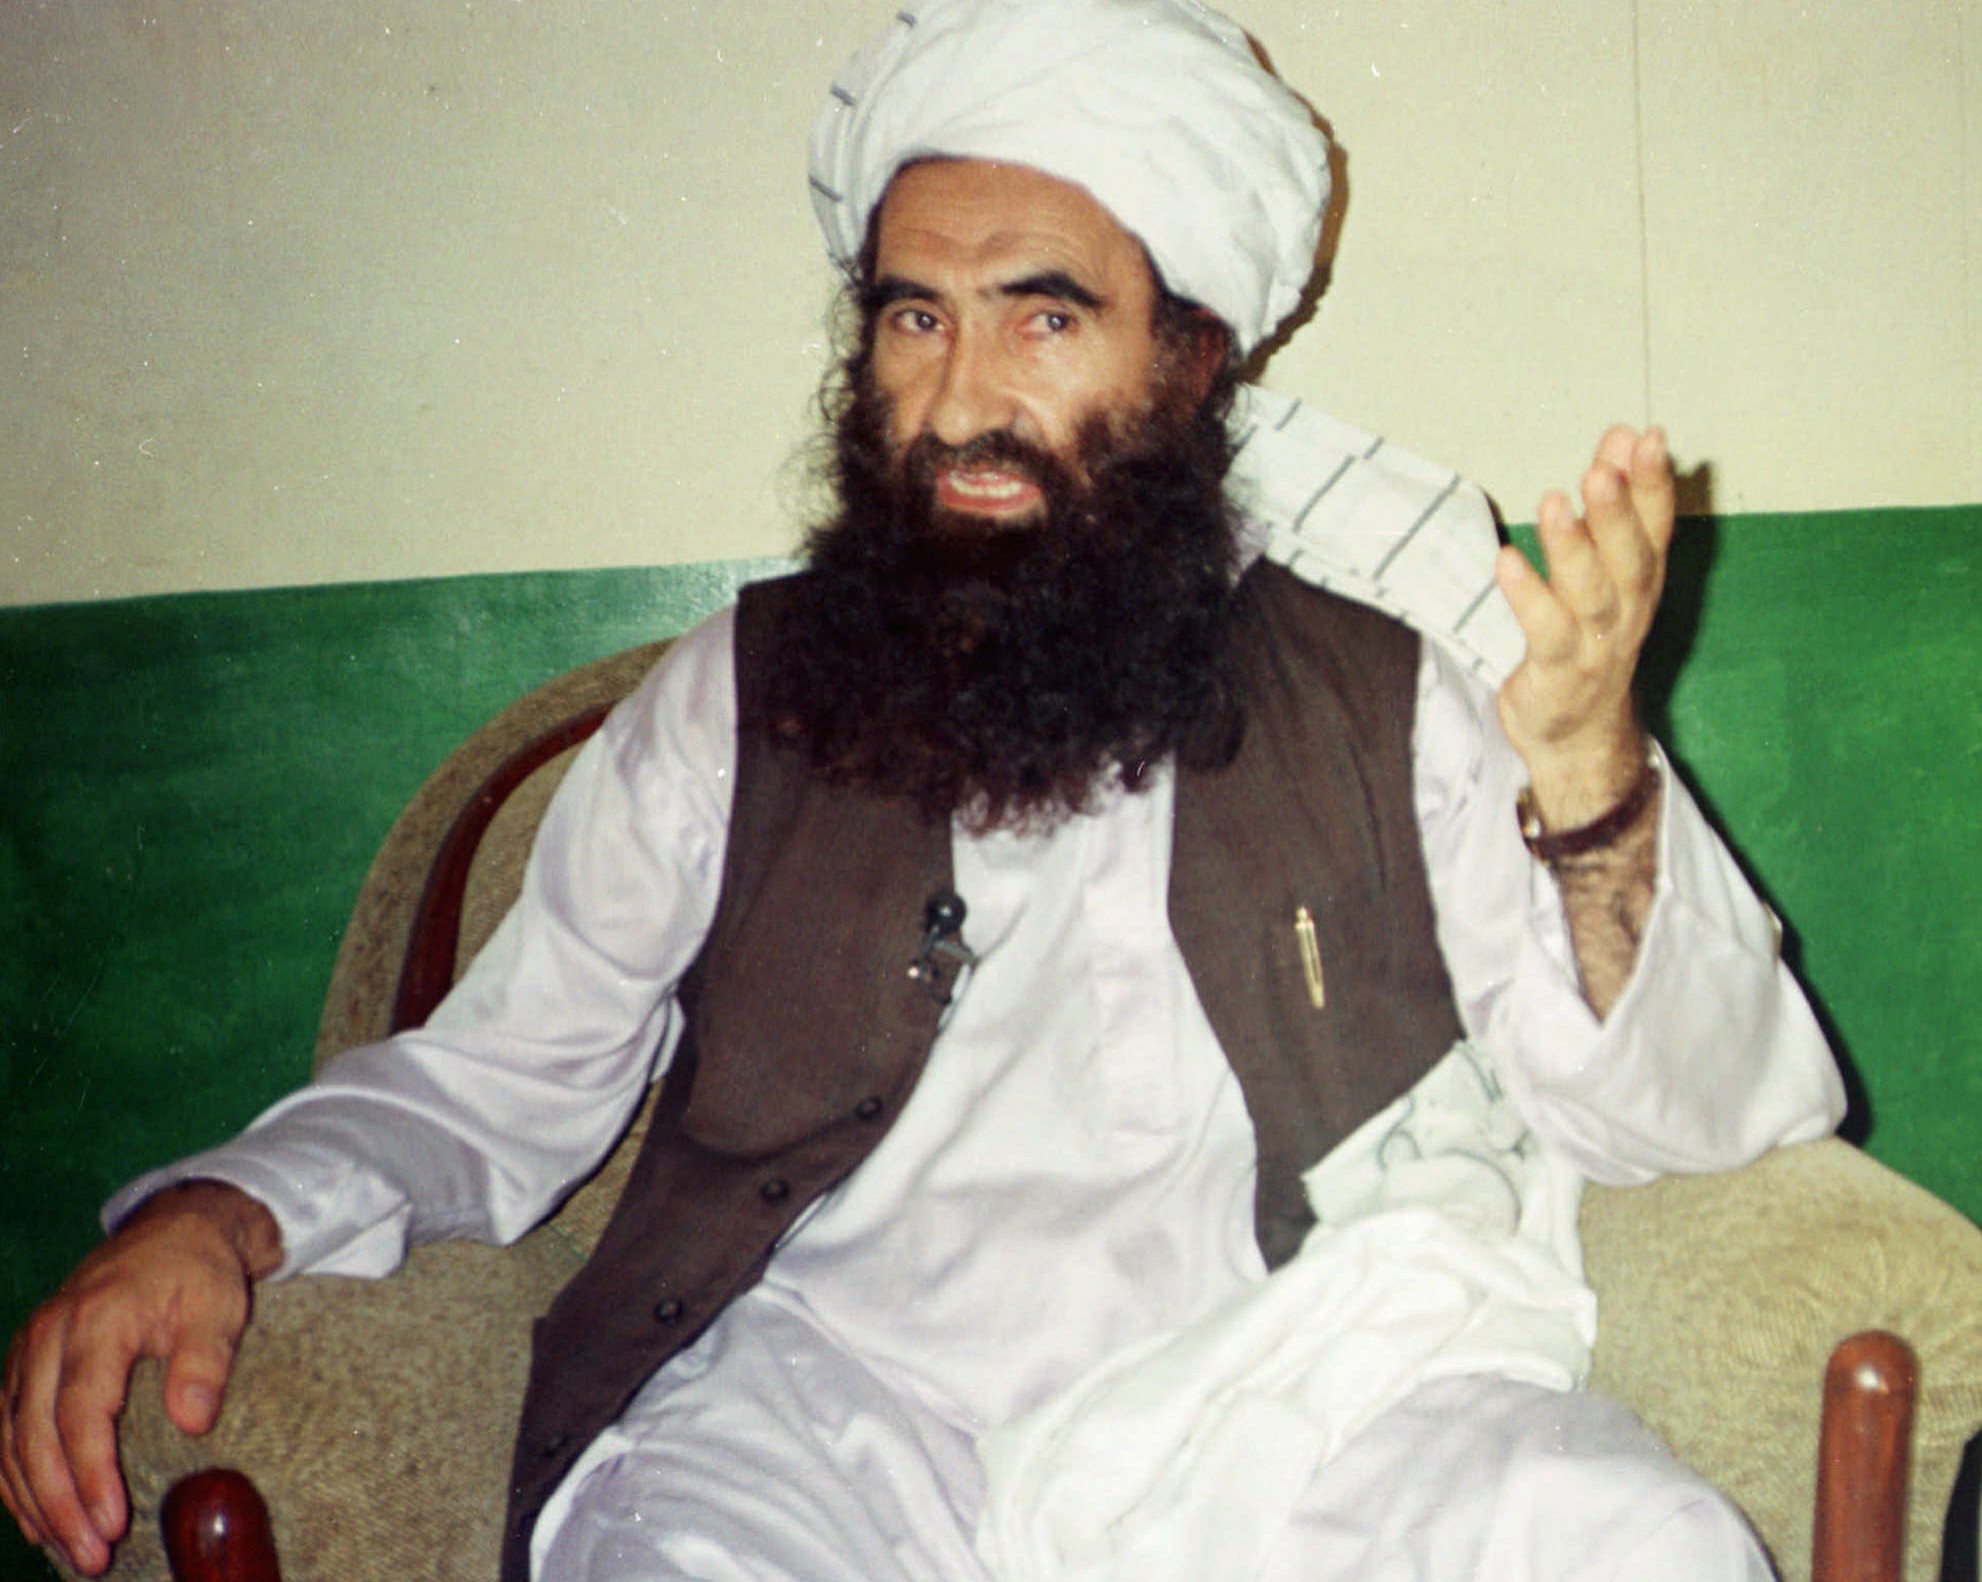 FILE - In this Saturday Aug. 22, 1998 file photo, Jalaluddin Haqqani, then Taliban Army Supreme Commander, speaks during an interview in Miram Shah, Pakistan. Al-Qaida has maintained longtime ties with a number of key figures within the broad coalition that is fighting U.S. and NATO forces in Afghanistan. Chief among them are Haqqani and his son Sirajuddin, whose Pakistan-based forces are battling the Americans and their allies across eastern Afghanistan. (AP Photo/Mohammed Riaz, file)